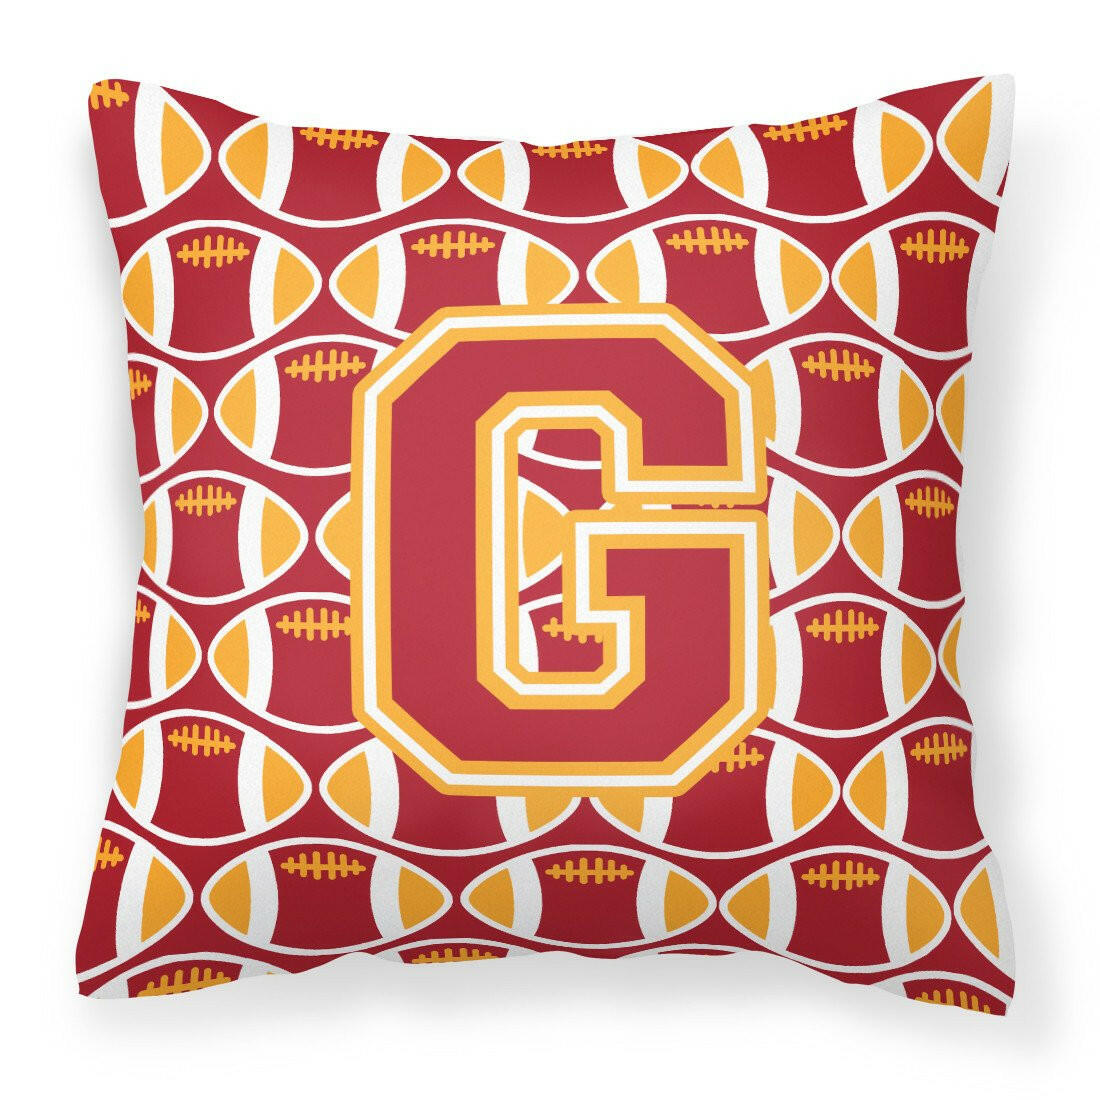 Letter G Football Cardinal and Gold Fabric Decorative Pillow CJ1070-GPW1414 by Caroline's Treasures